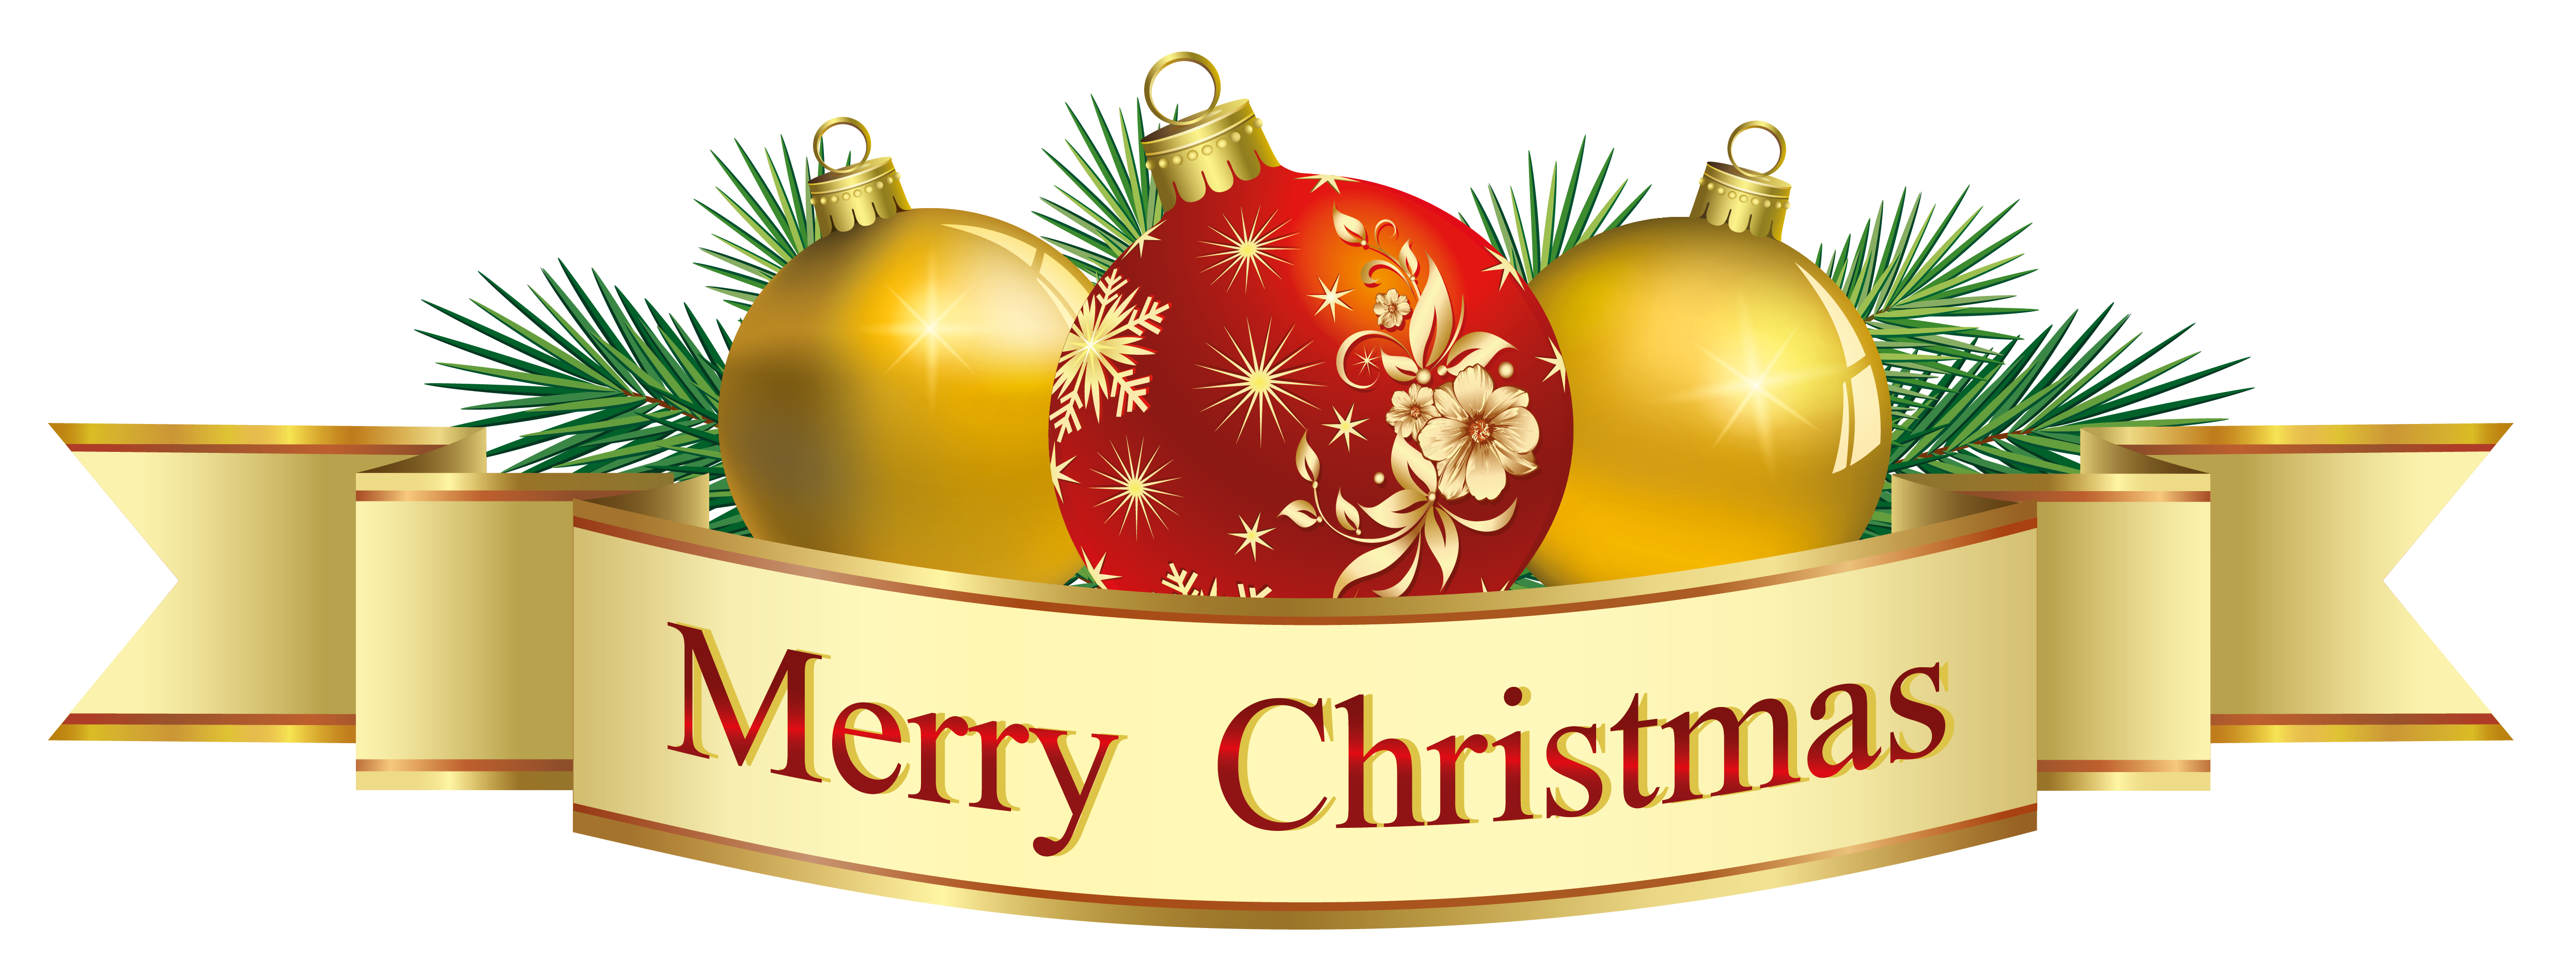 https://gallery.yopriceville.com/var/albums/Free-Clipart-Pictures/Christmas-PNG/Transparent_Merry_Christmas_Deco_Clipart.png?m=1415796780